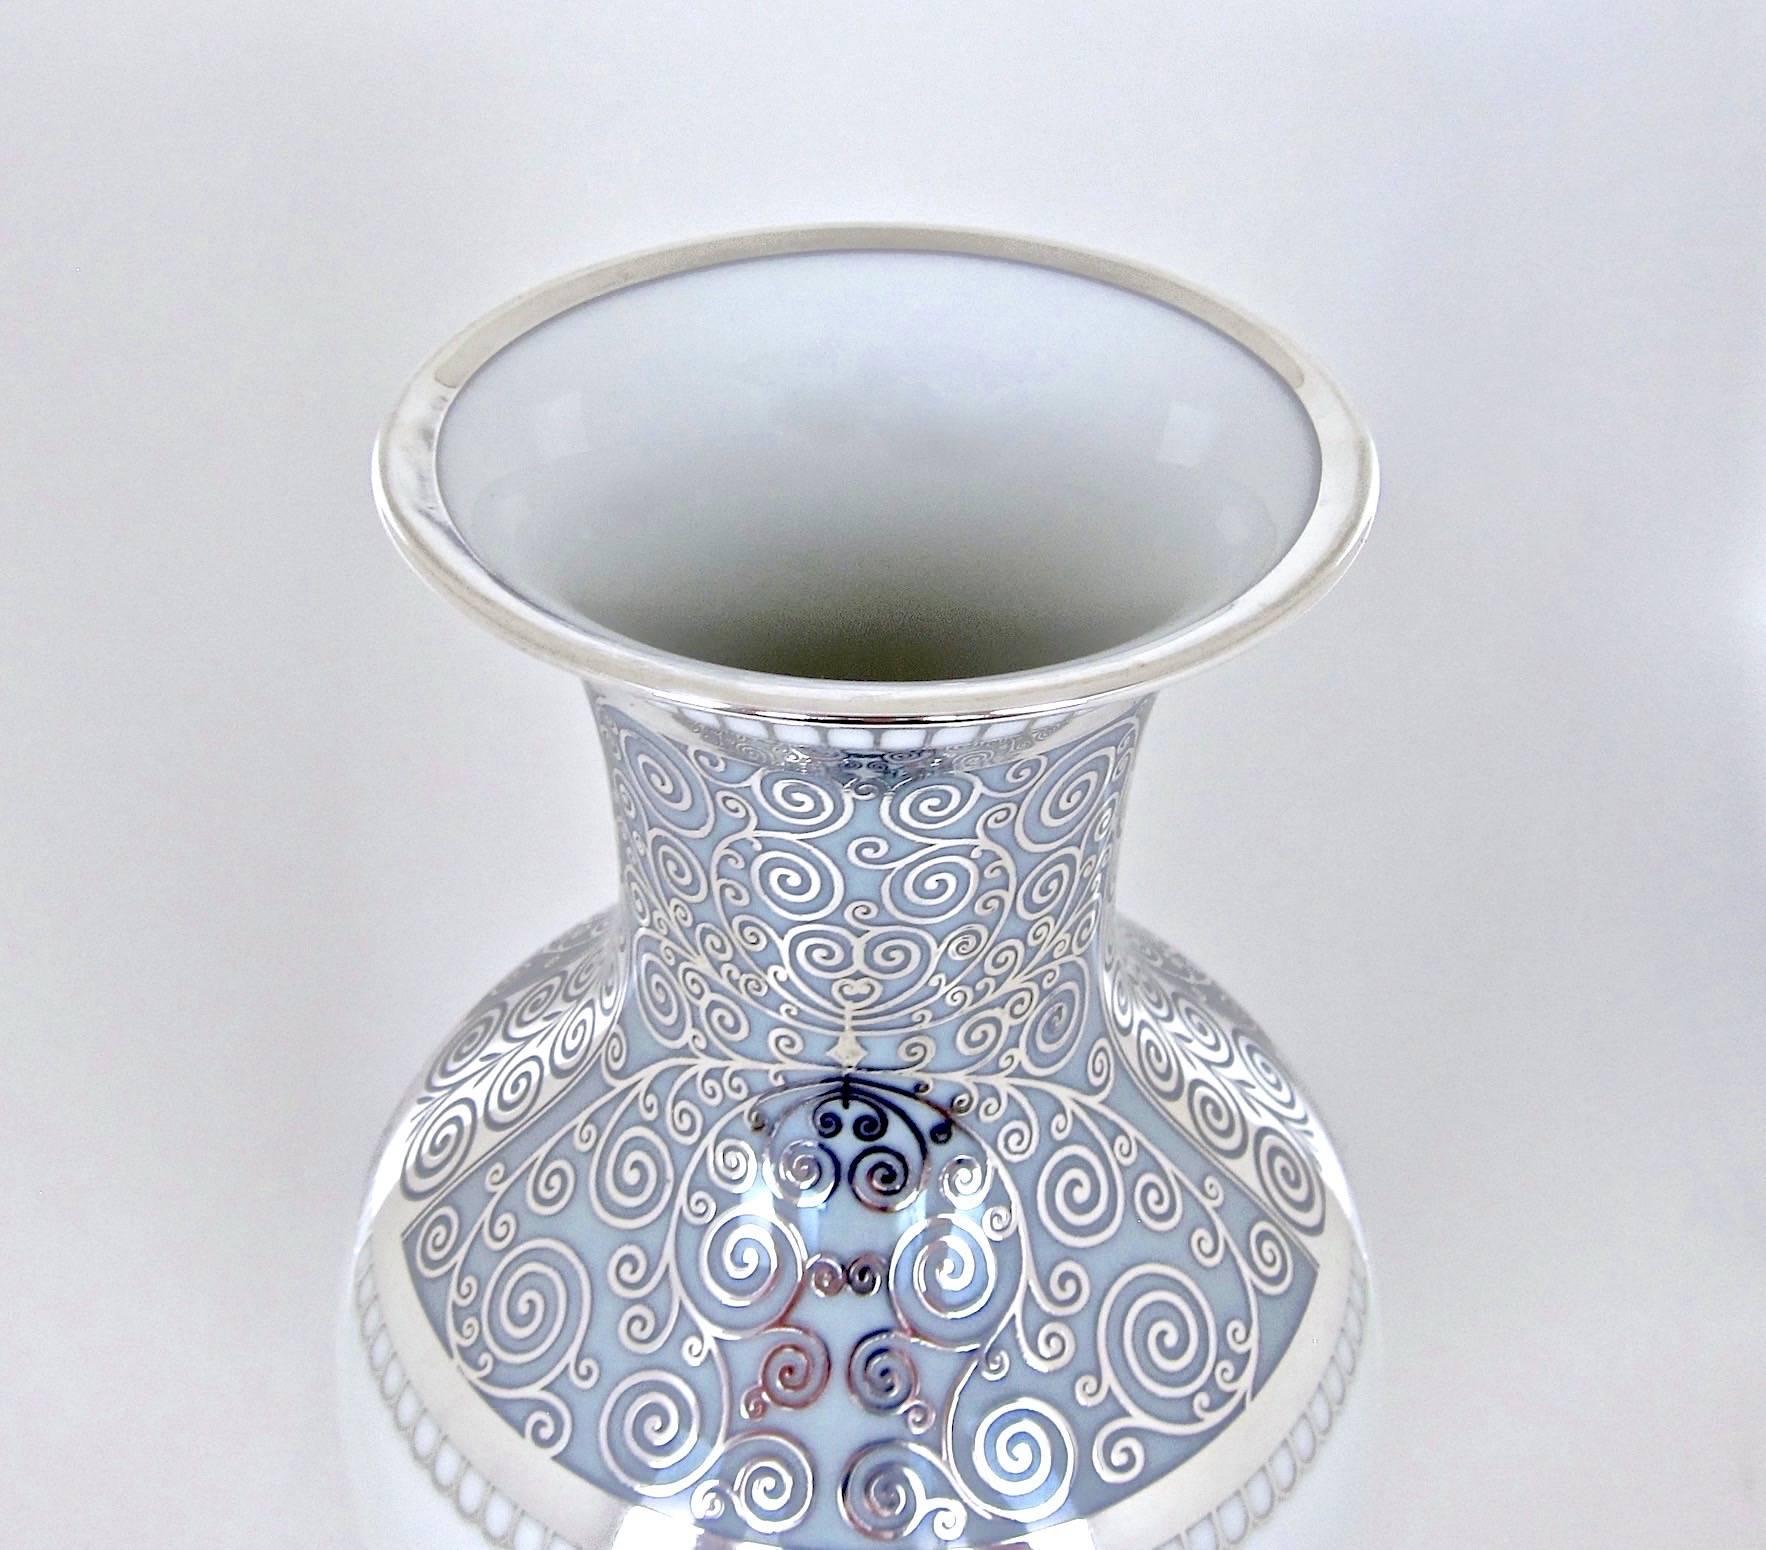 A large vintage Rosenthal porcelain vase ornamented with an elegant, overlay design of pure silver handcrafted in Germany between 1953 and 1956. The silver overlay work consists of spiraling tendrils with two silver bands at the rim, one at the